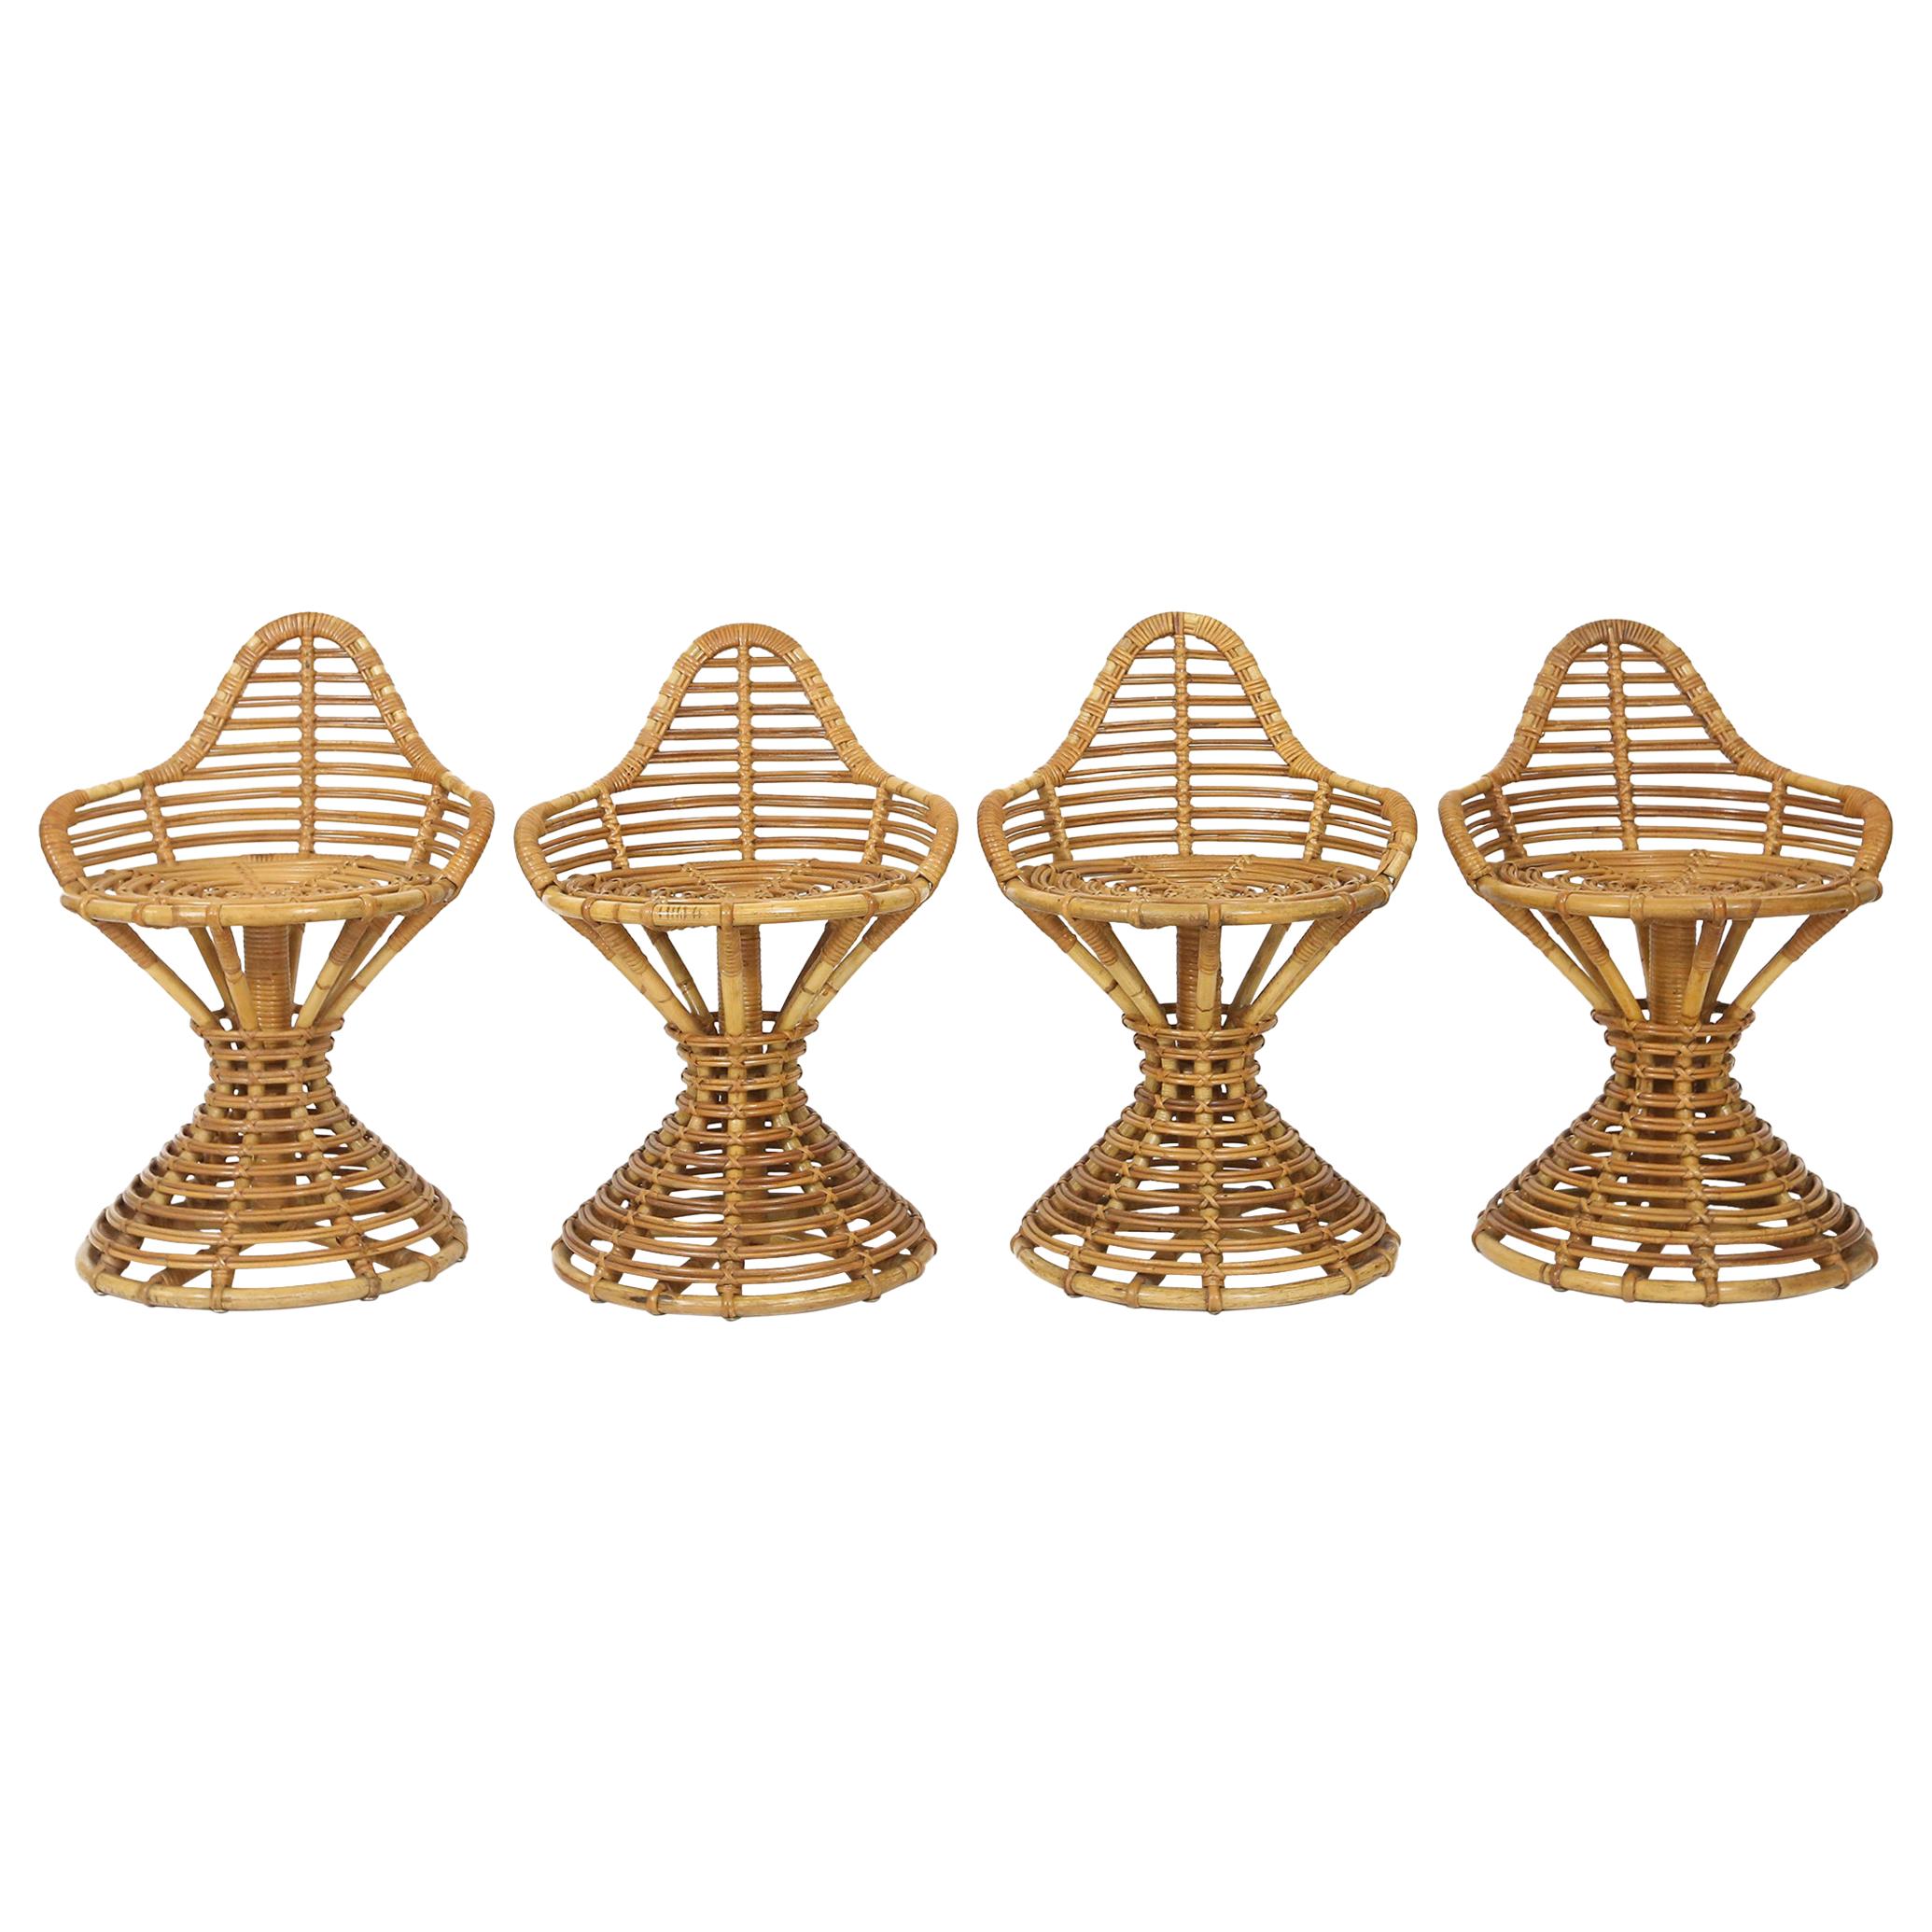 Set of 4 Mary Beatrice Bloch Rattan Stools Manufactured by Robert Wengler For Sale